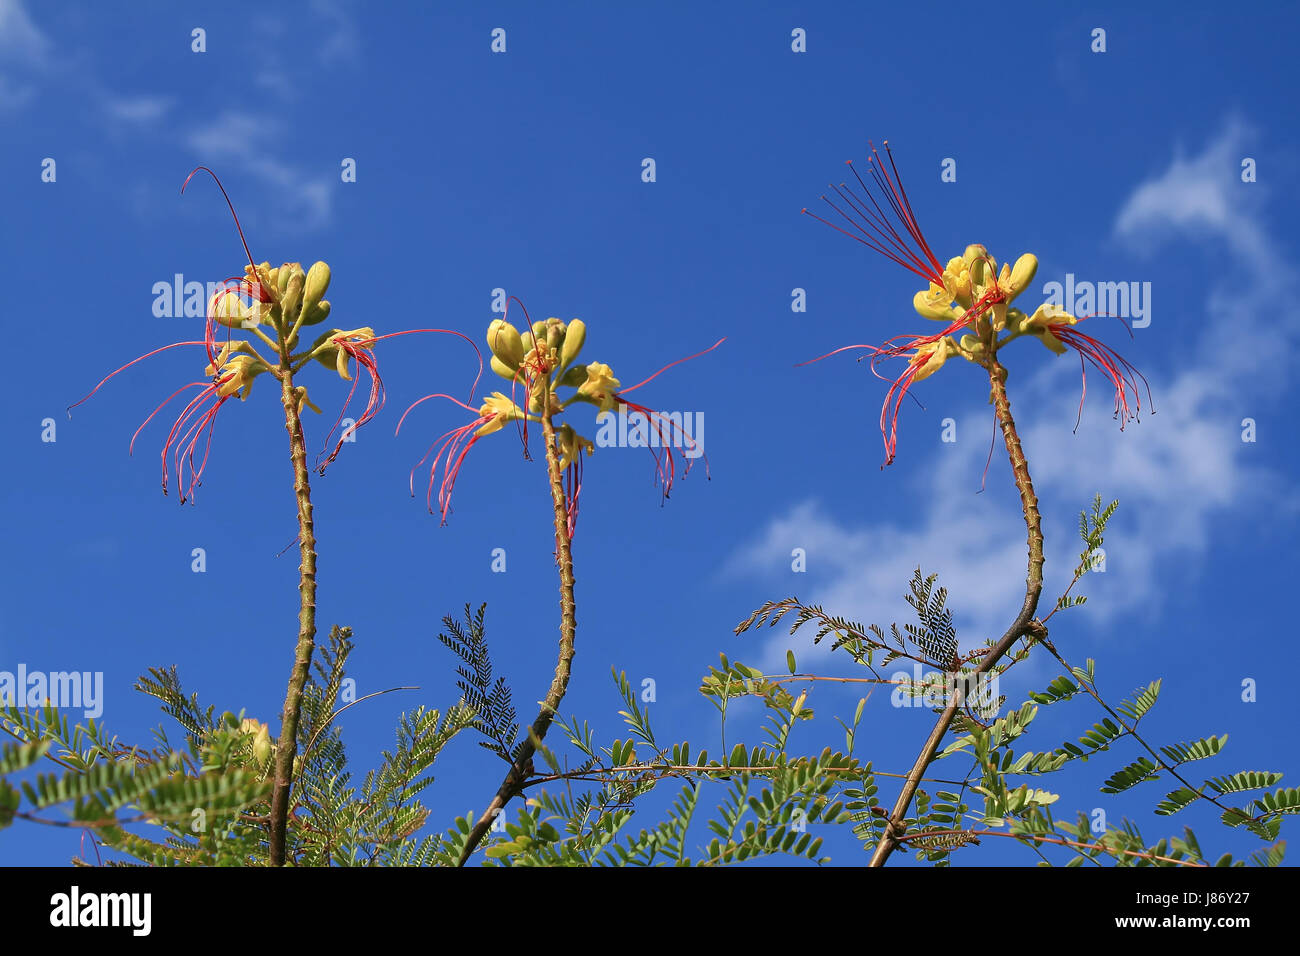 blue, blossoms, exotic, bleed, firmament, sky, red, yellow, Stock Photo